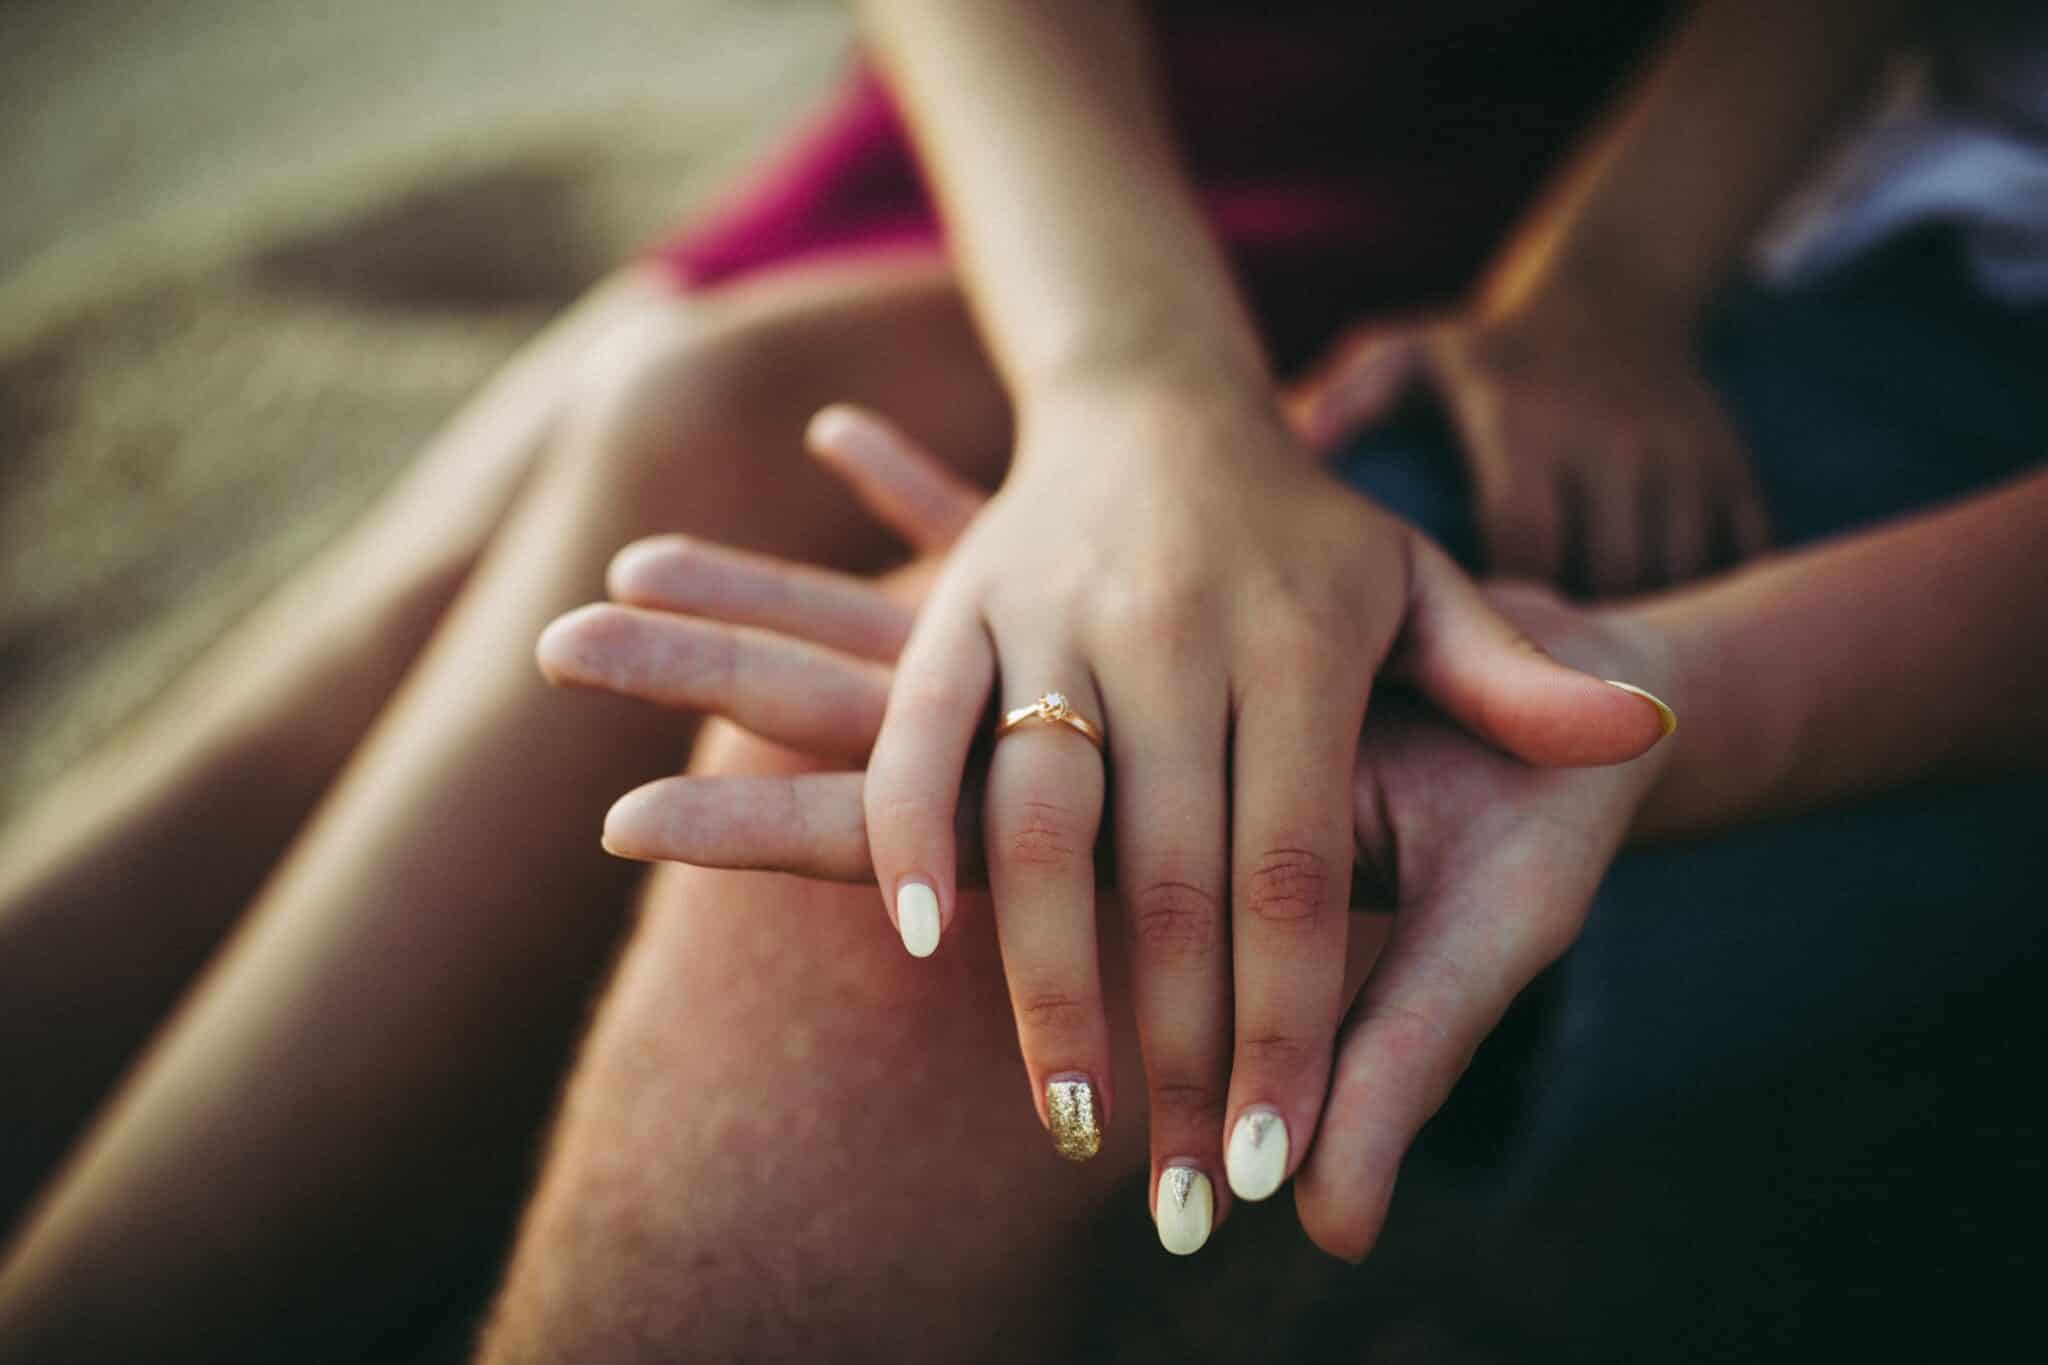 newly engaged couple's hands with engagement ring for 29 best engagement gifts.